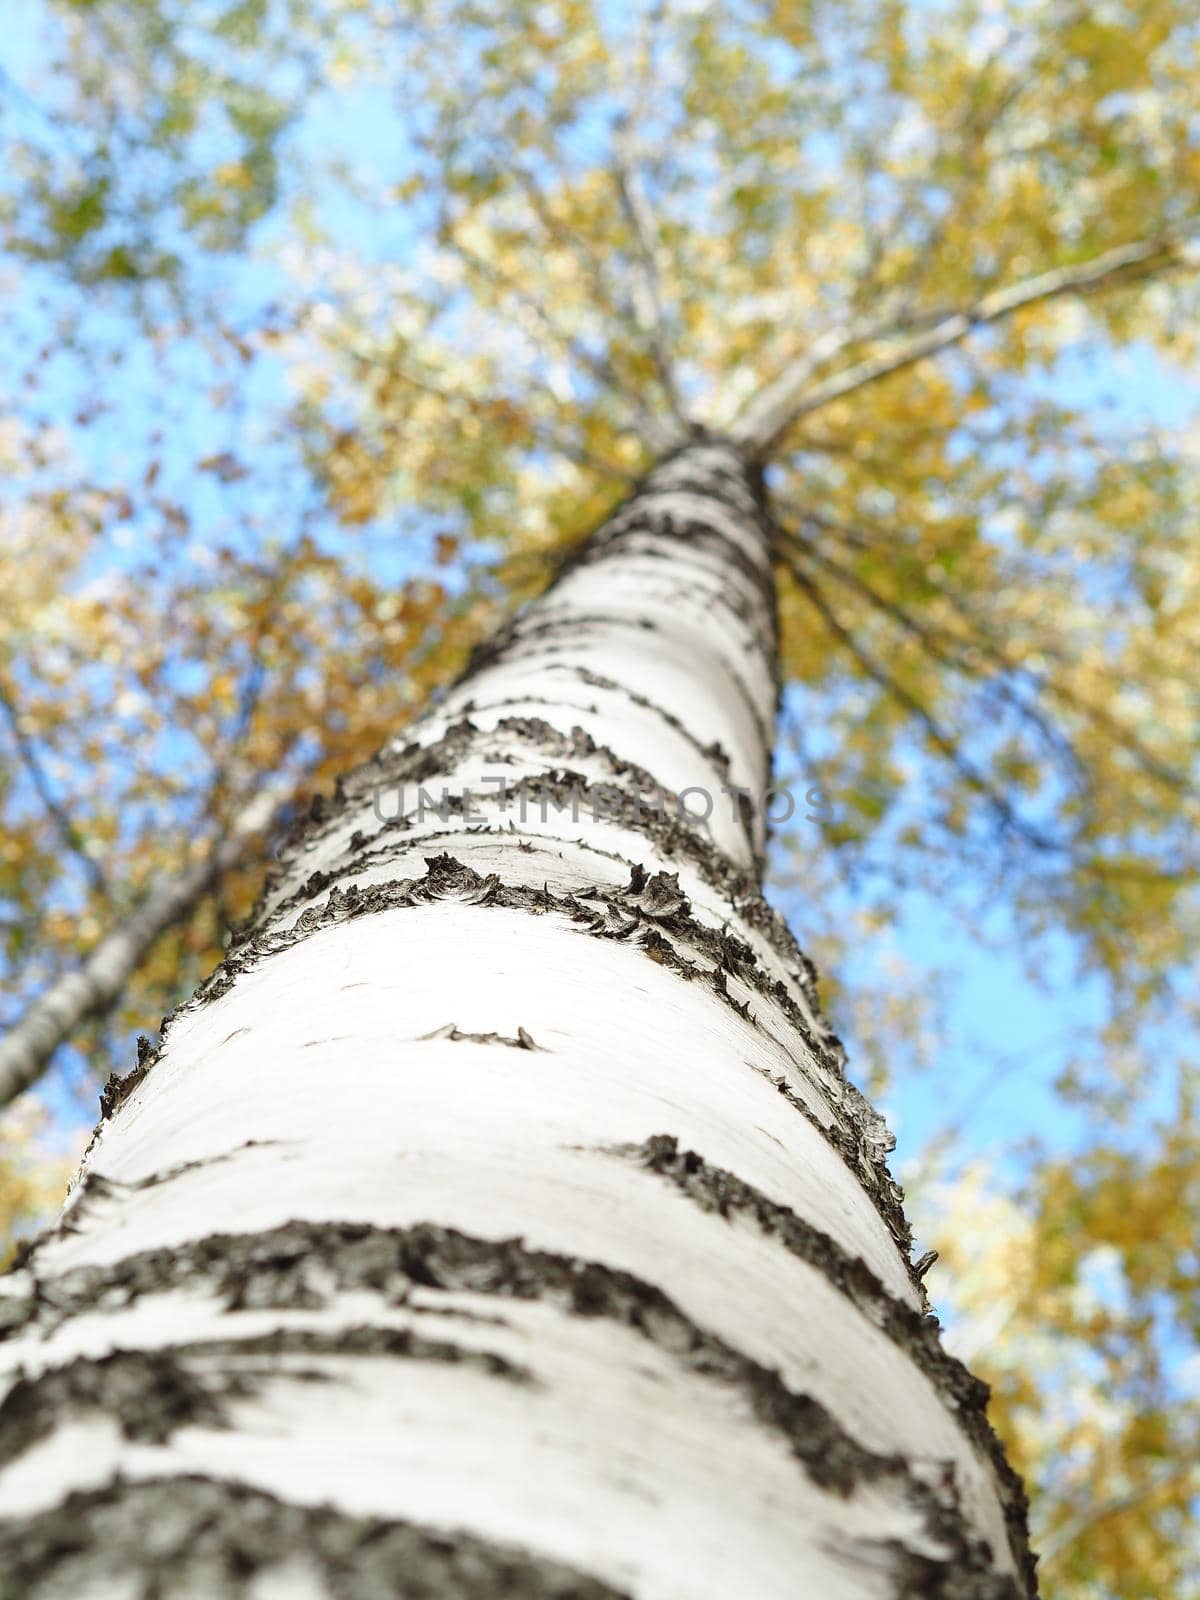 The trunk of the birch, the view from below. The crown of a tree, against a blue sky.